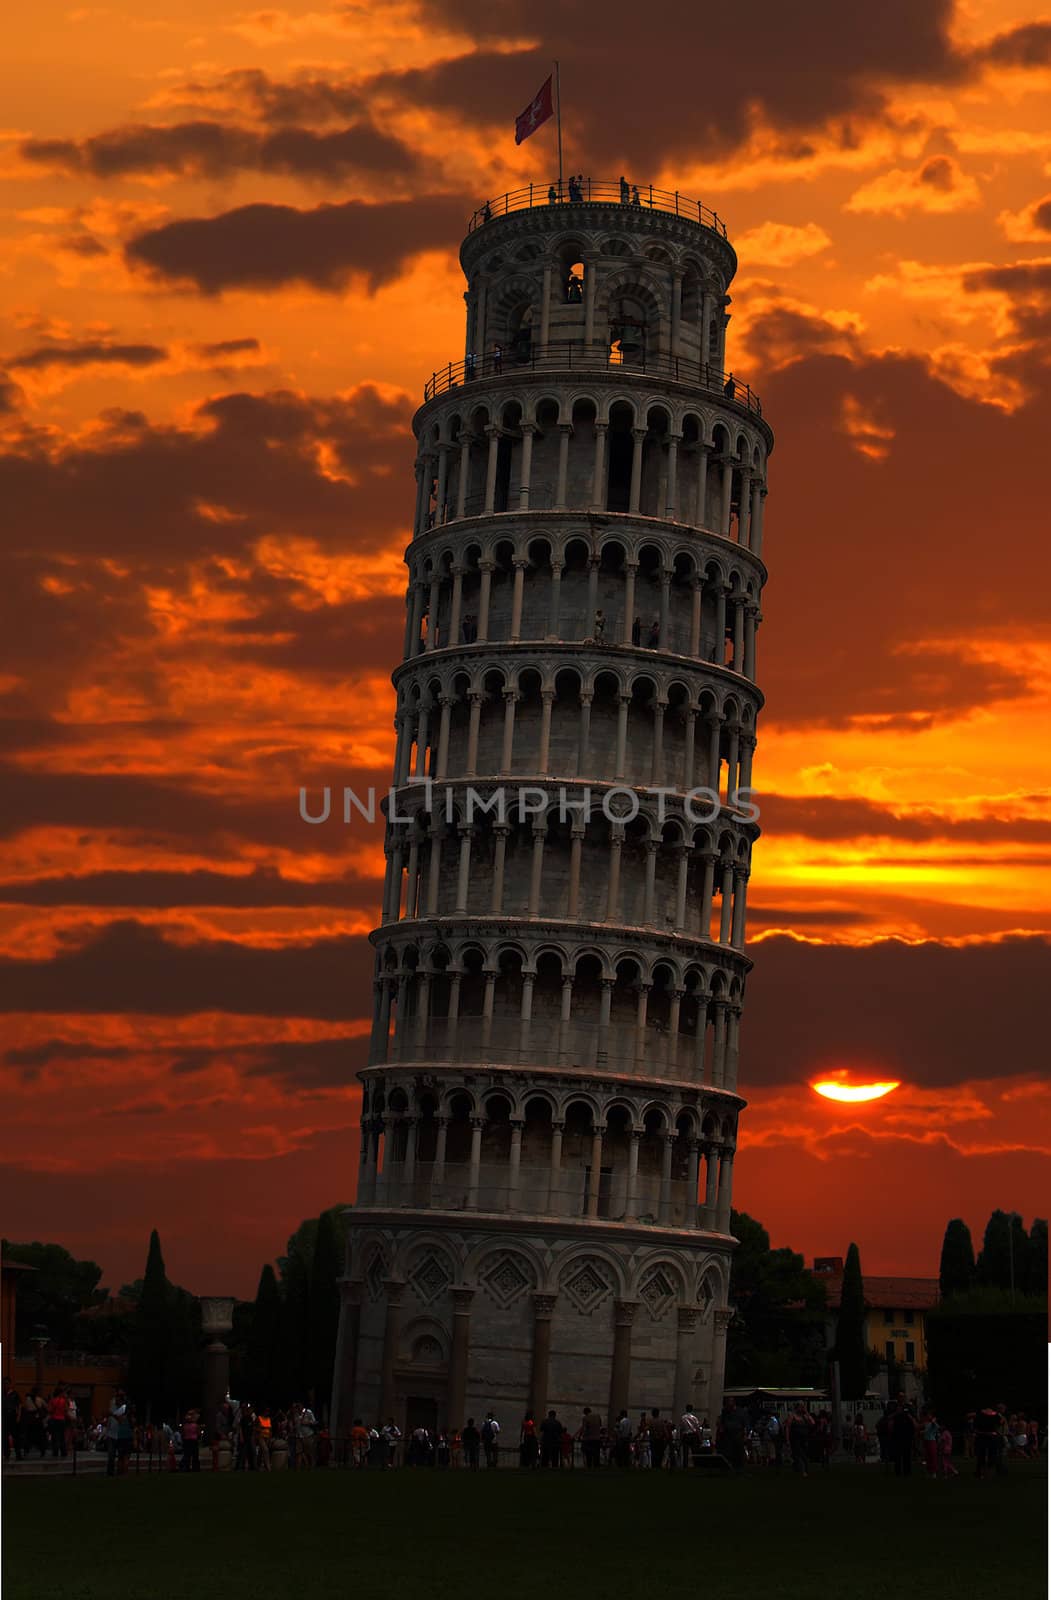 The famous leaning tower of Pisa Italy